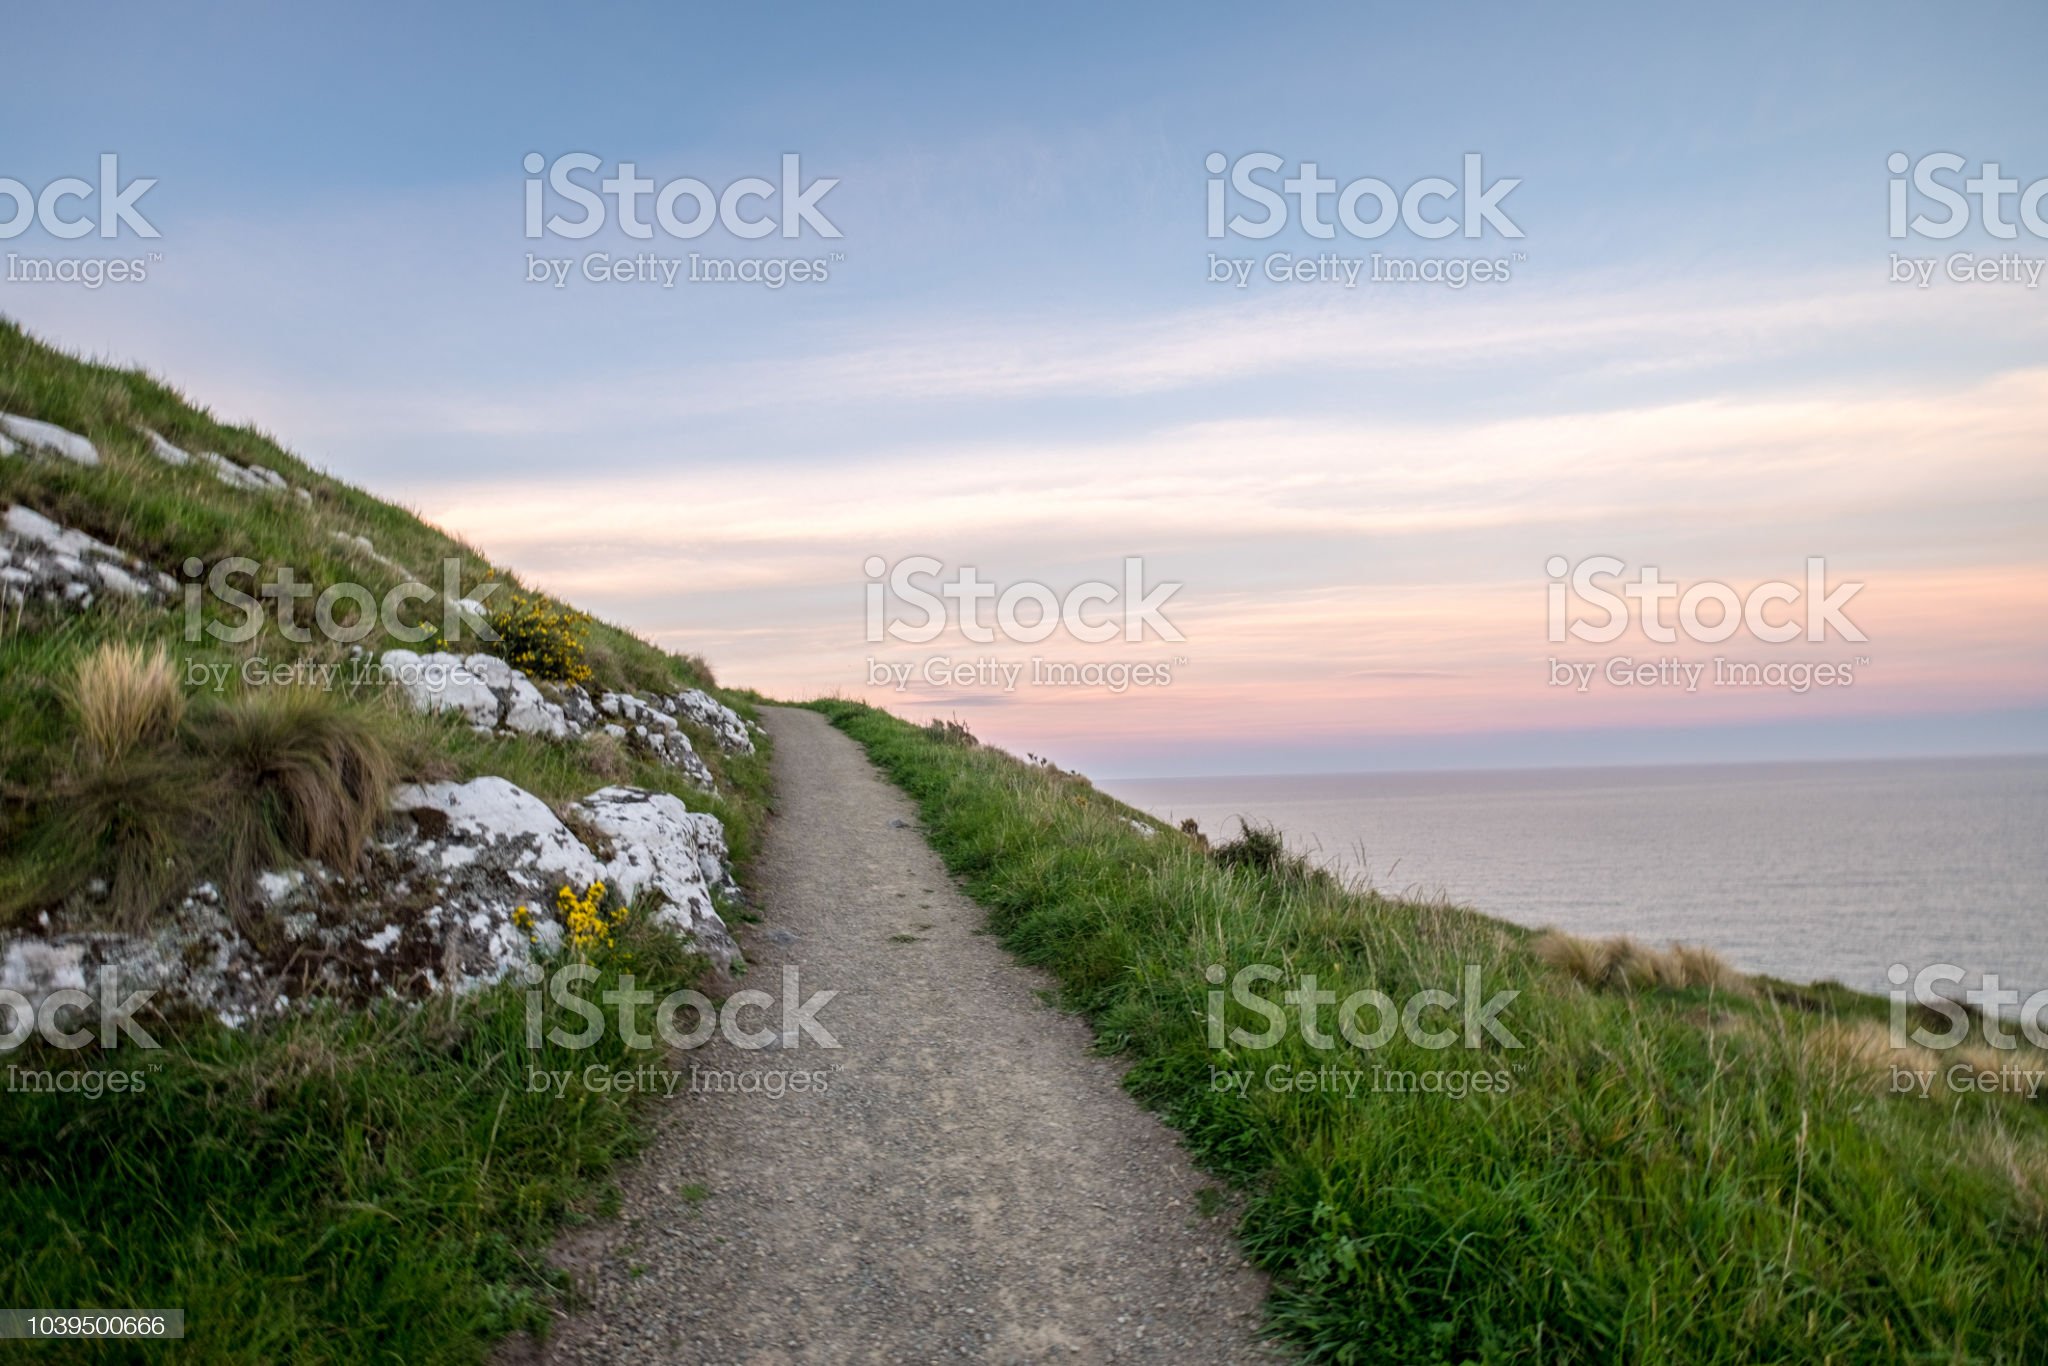 The path is beautiful. It looks as if the road is going nowhere. As the sun is settings, the sky is colourful and vibrant. I can see into the horizon.